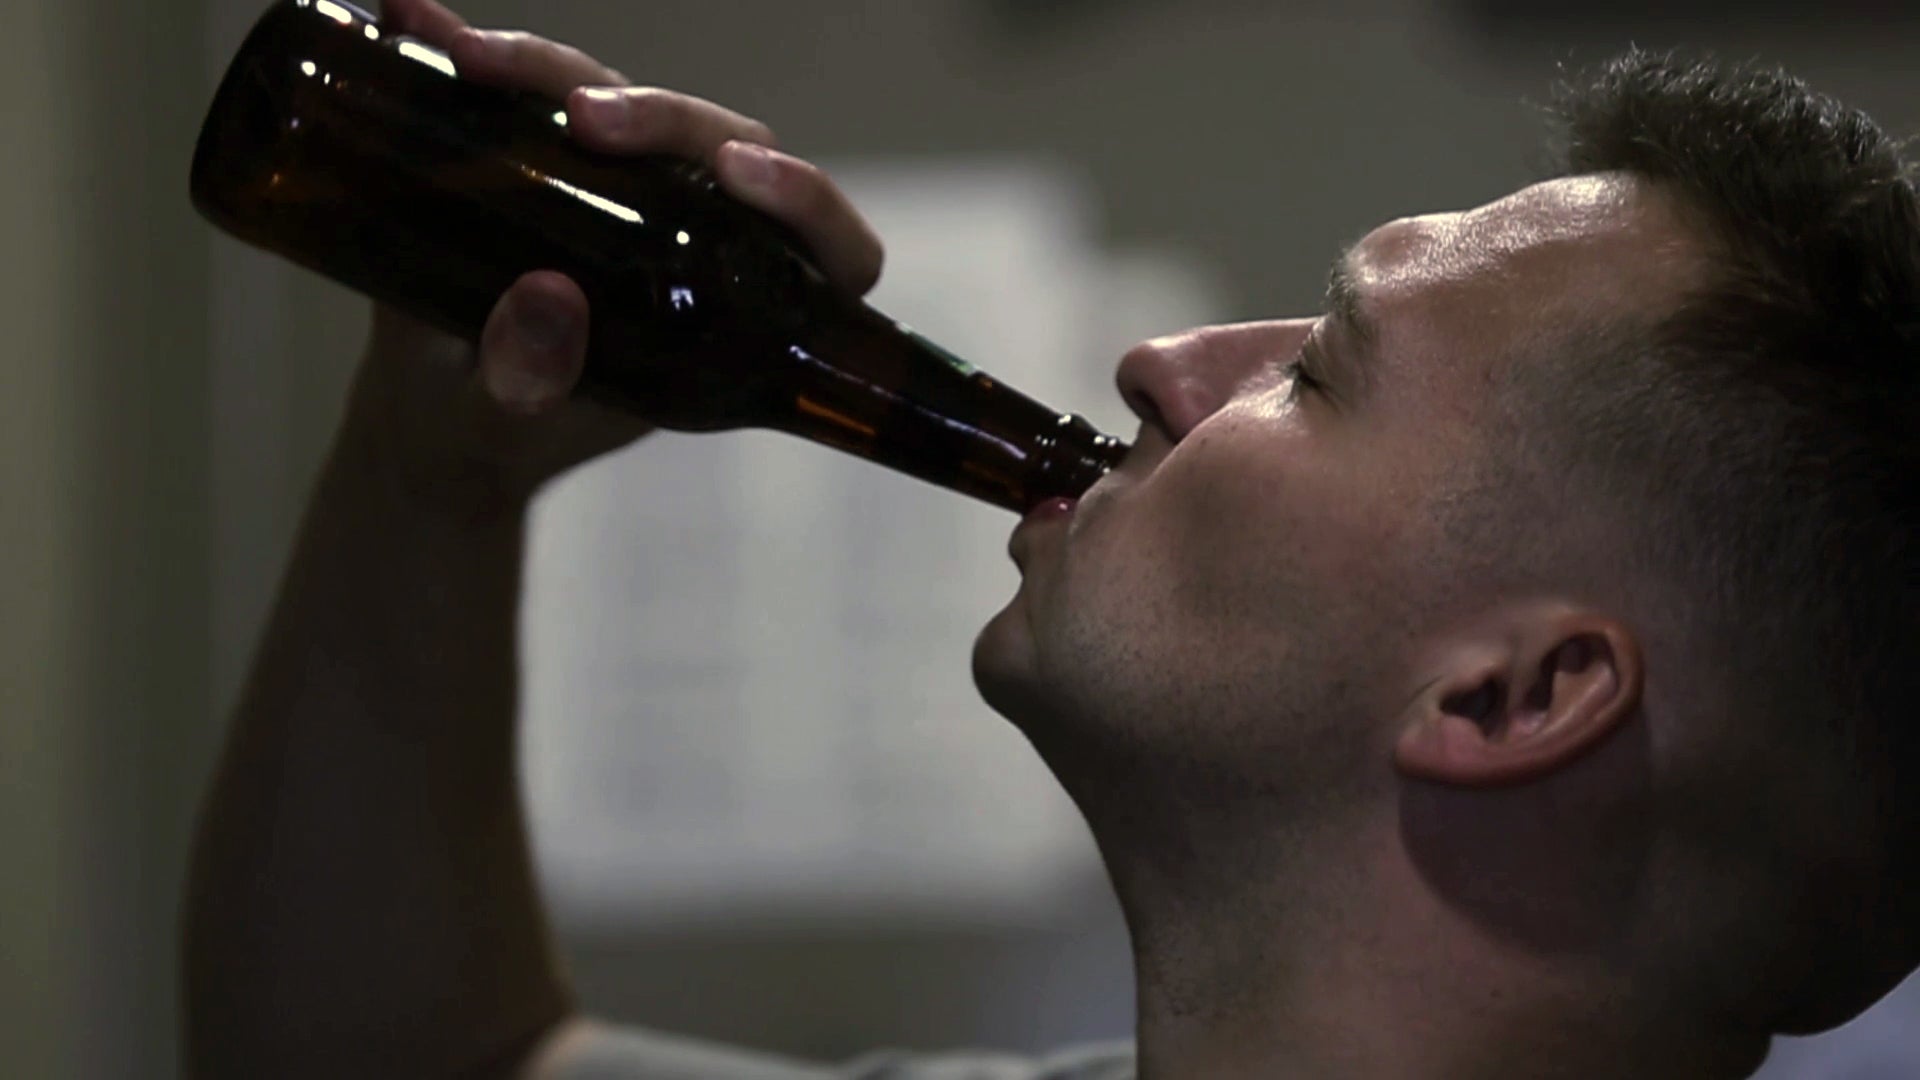 The Army may ditch alcohol restrictions for soldiers in the barracks